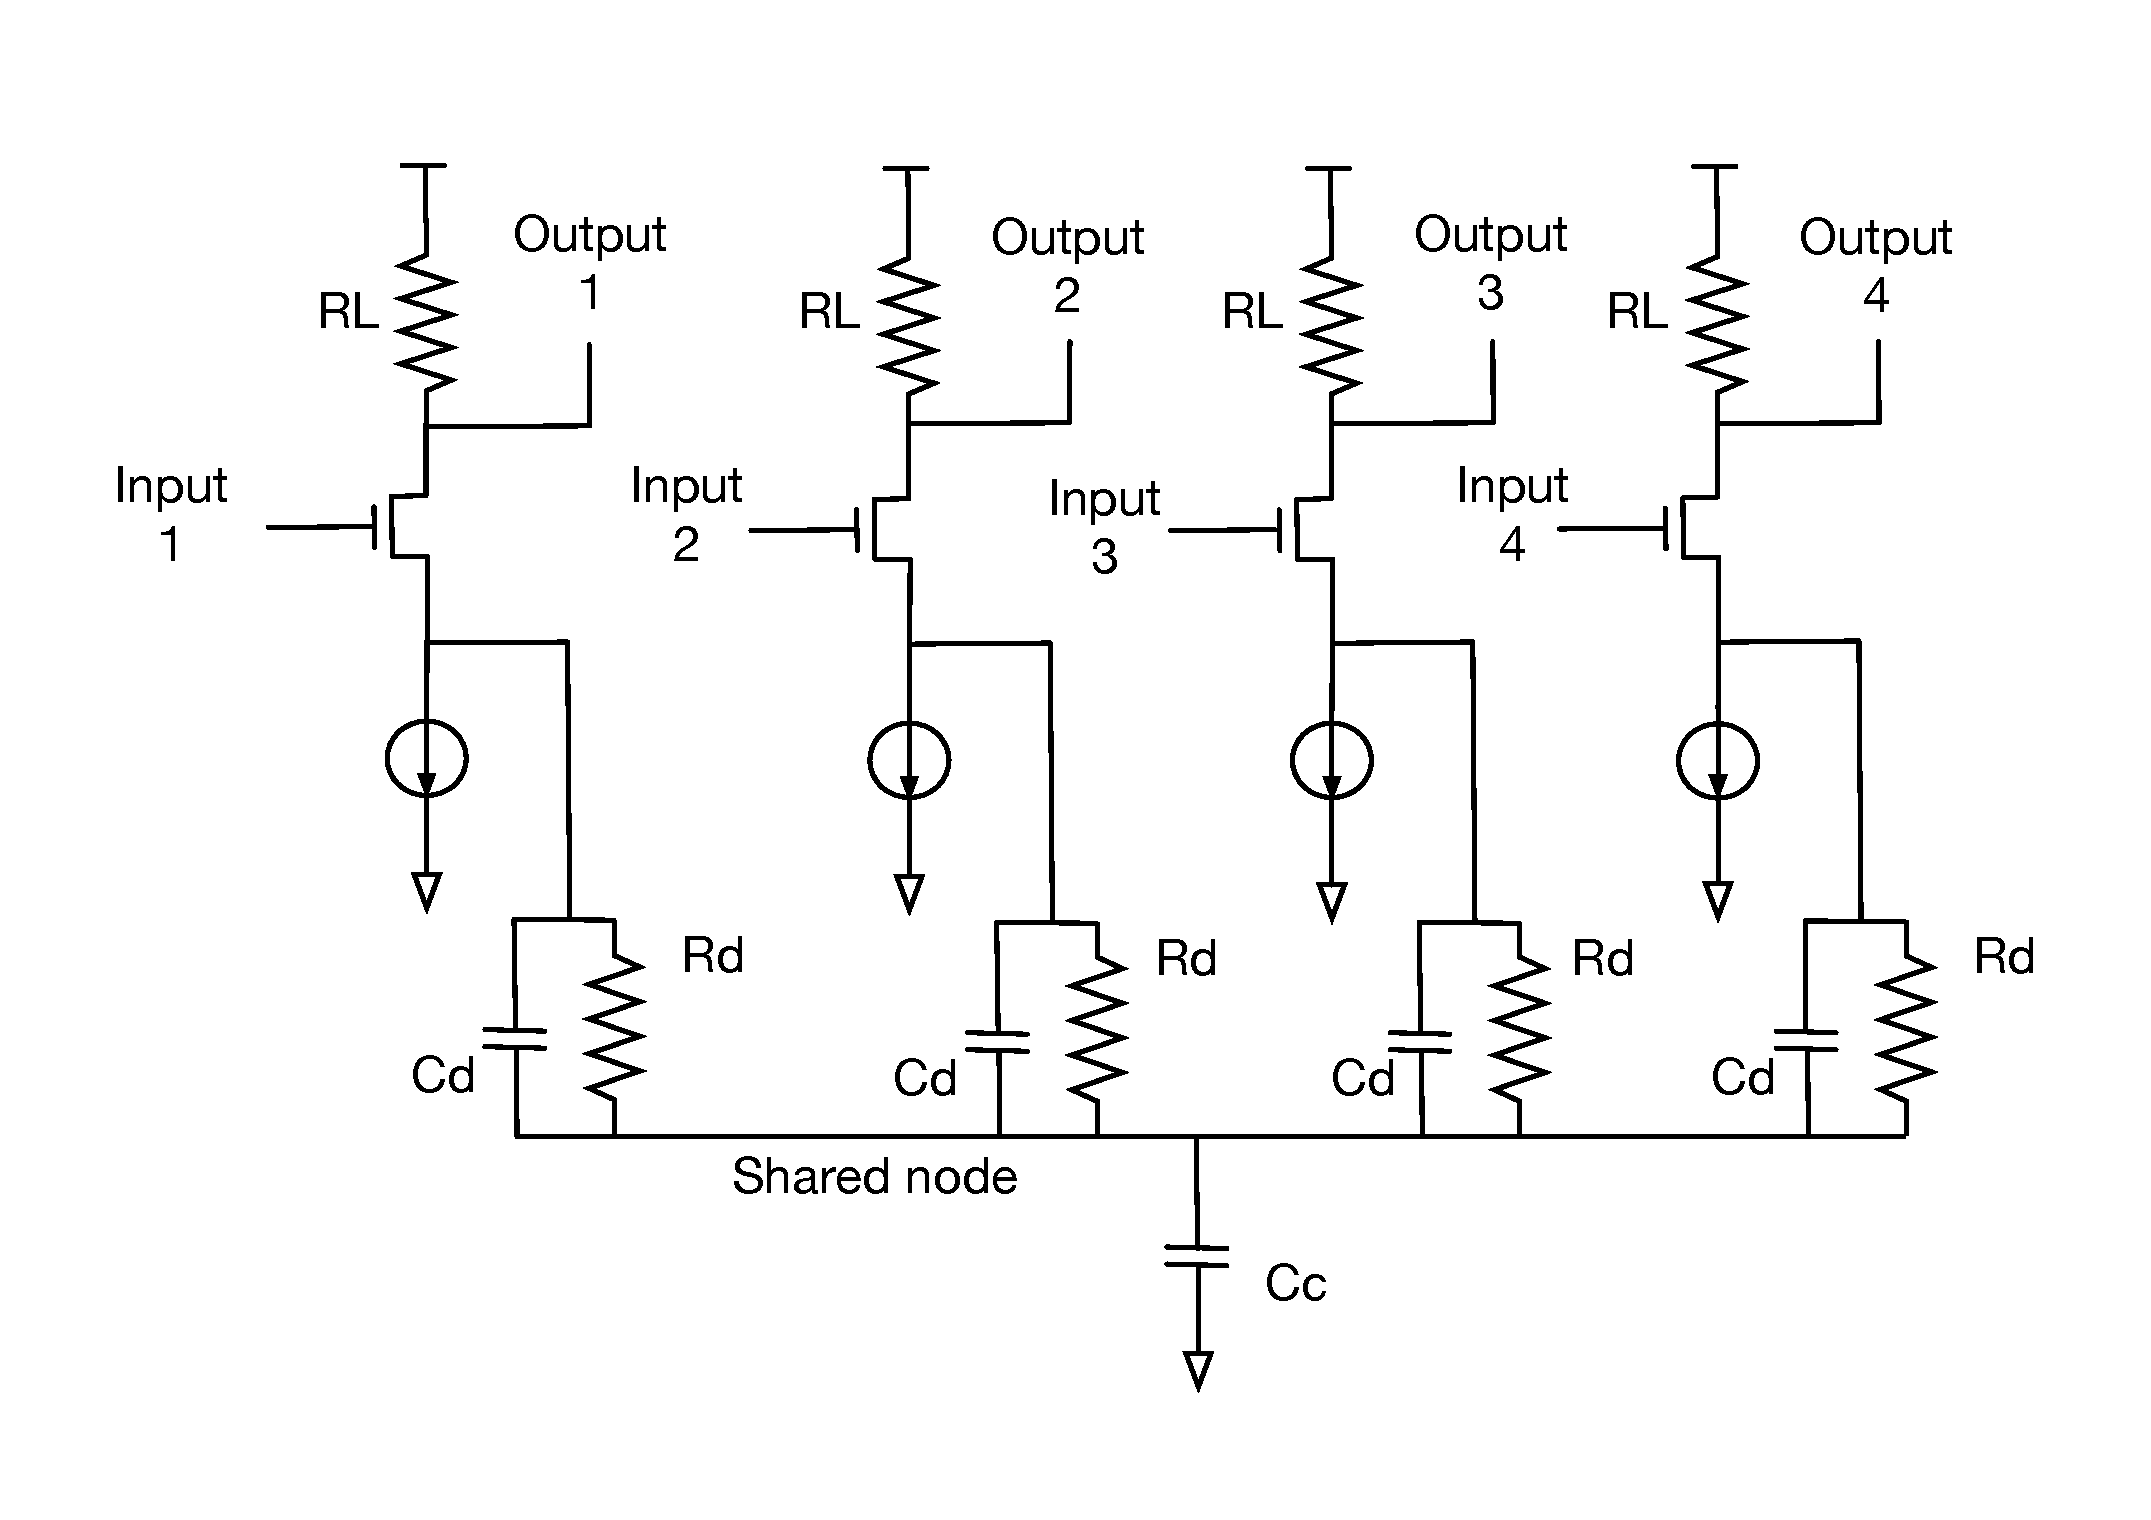 Multiwire Linear Equalizer for Vector Signaling Code Receiver